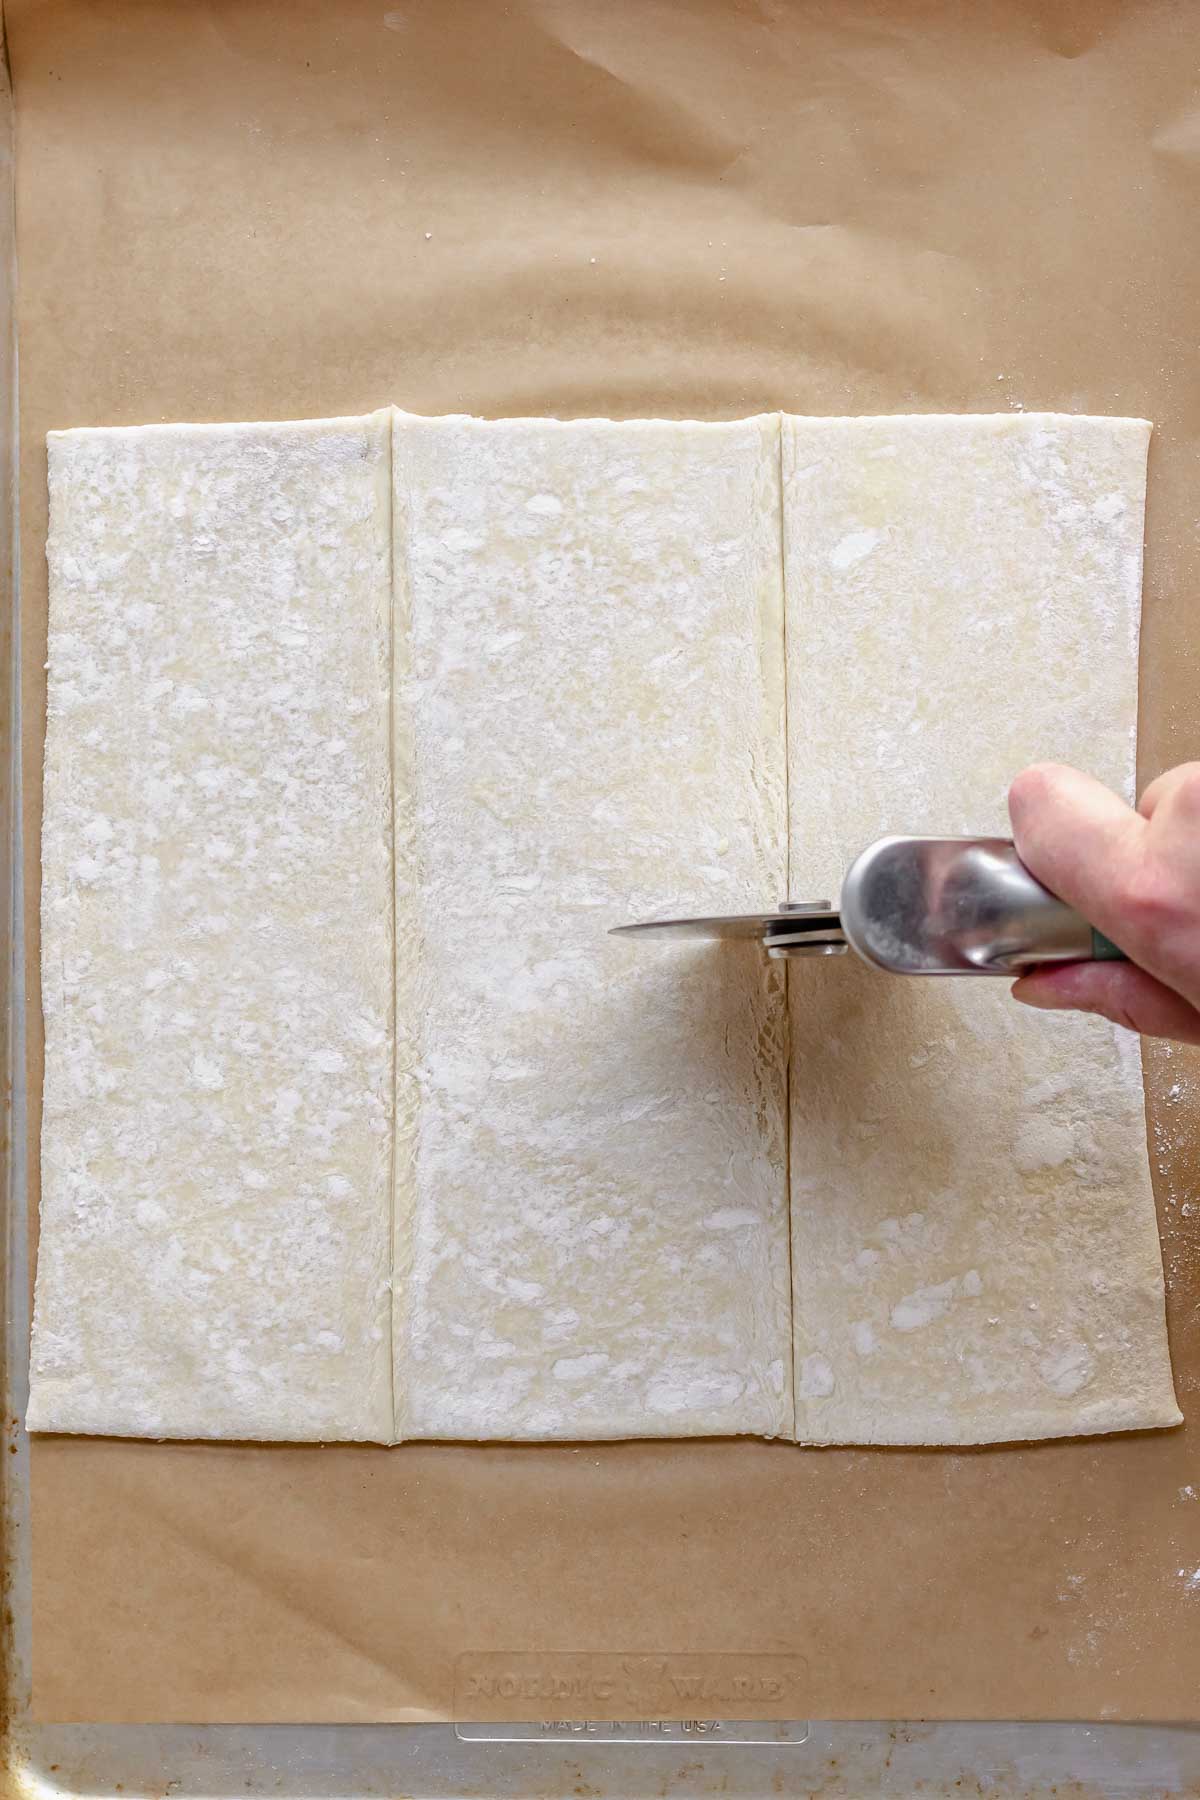 A hand cuts puff pastry into 6 pieces with a pizza cutter.